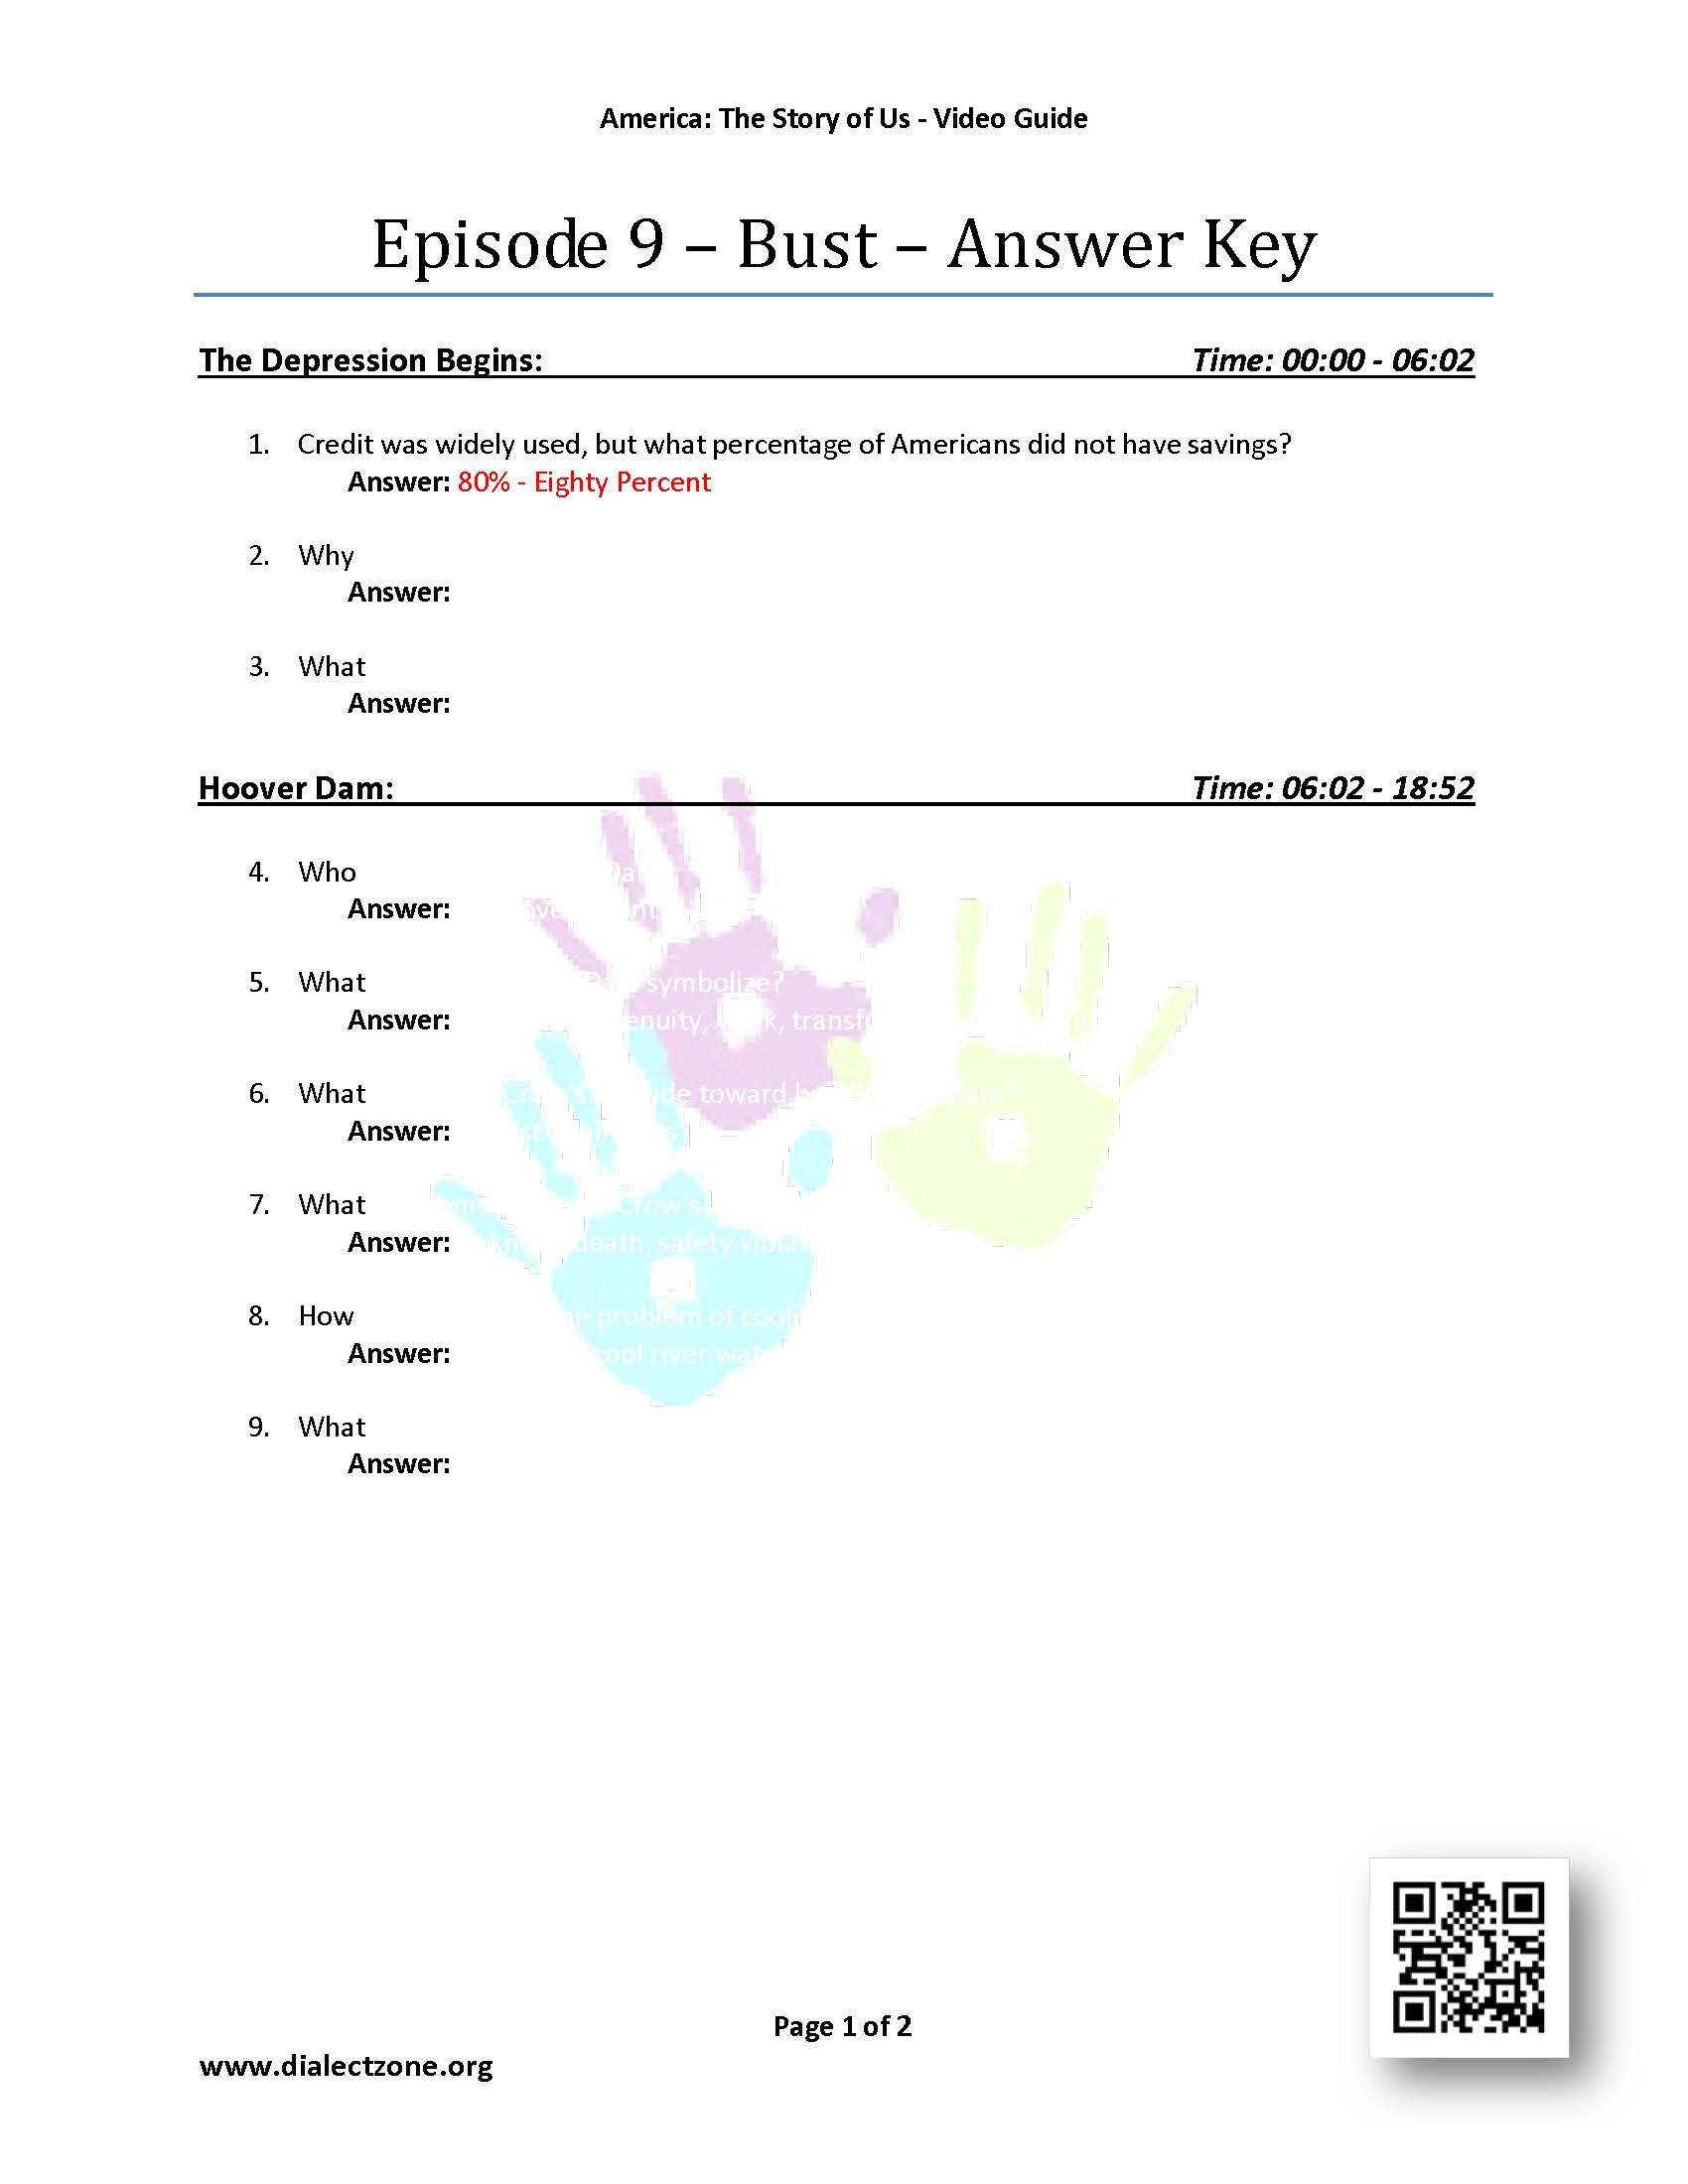 Episode 9  Bust  Answer Keys Atsouep9Key  199  Dialect Zone Pertaining To America The Story Of Us Bust Worksheet Pdf Answers